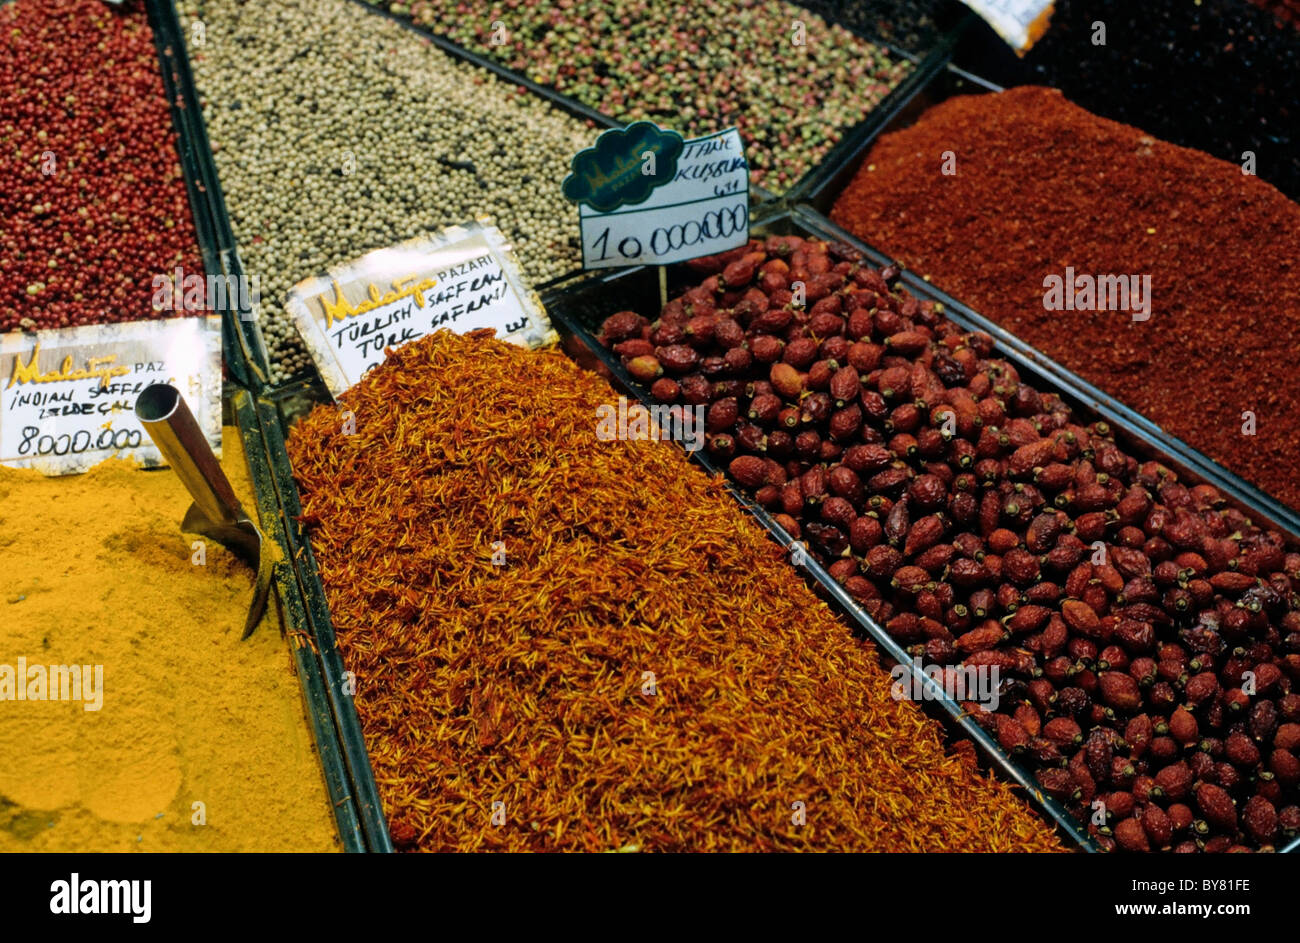 Stall selling spices at the Grand Bazaar, Istanbul, Turkey. Stock Photo